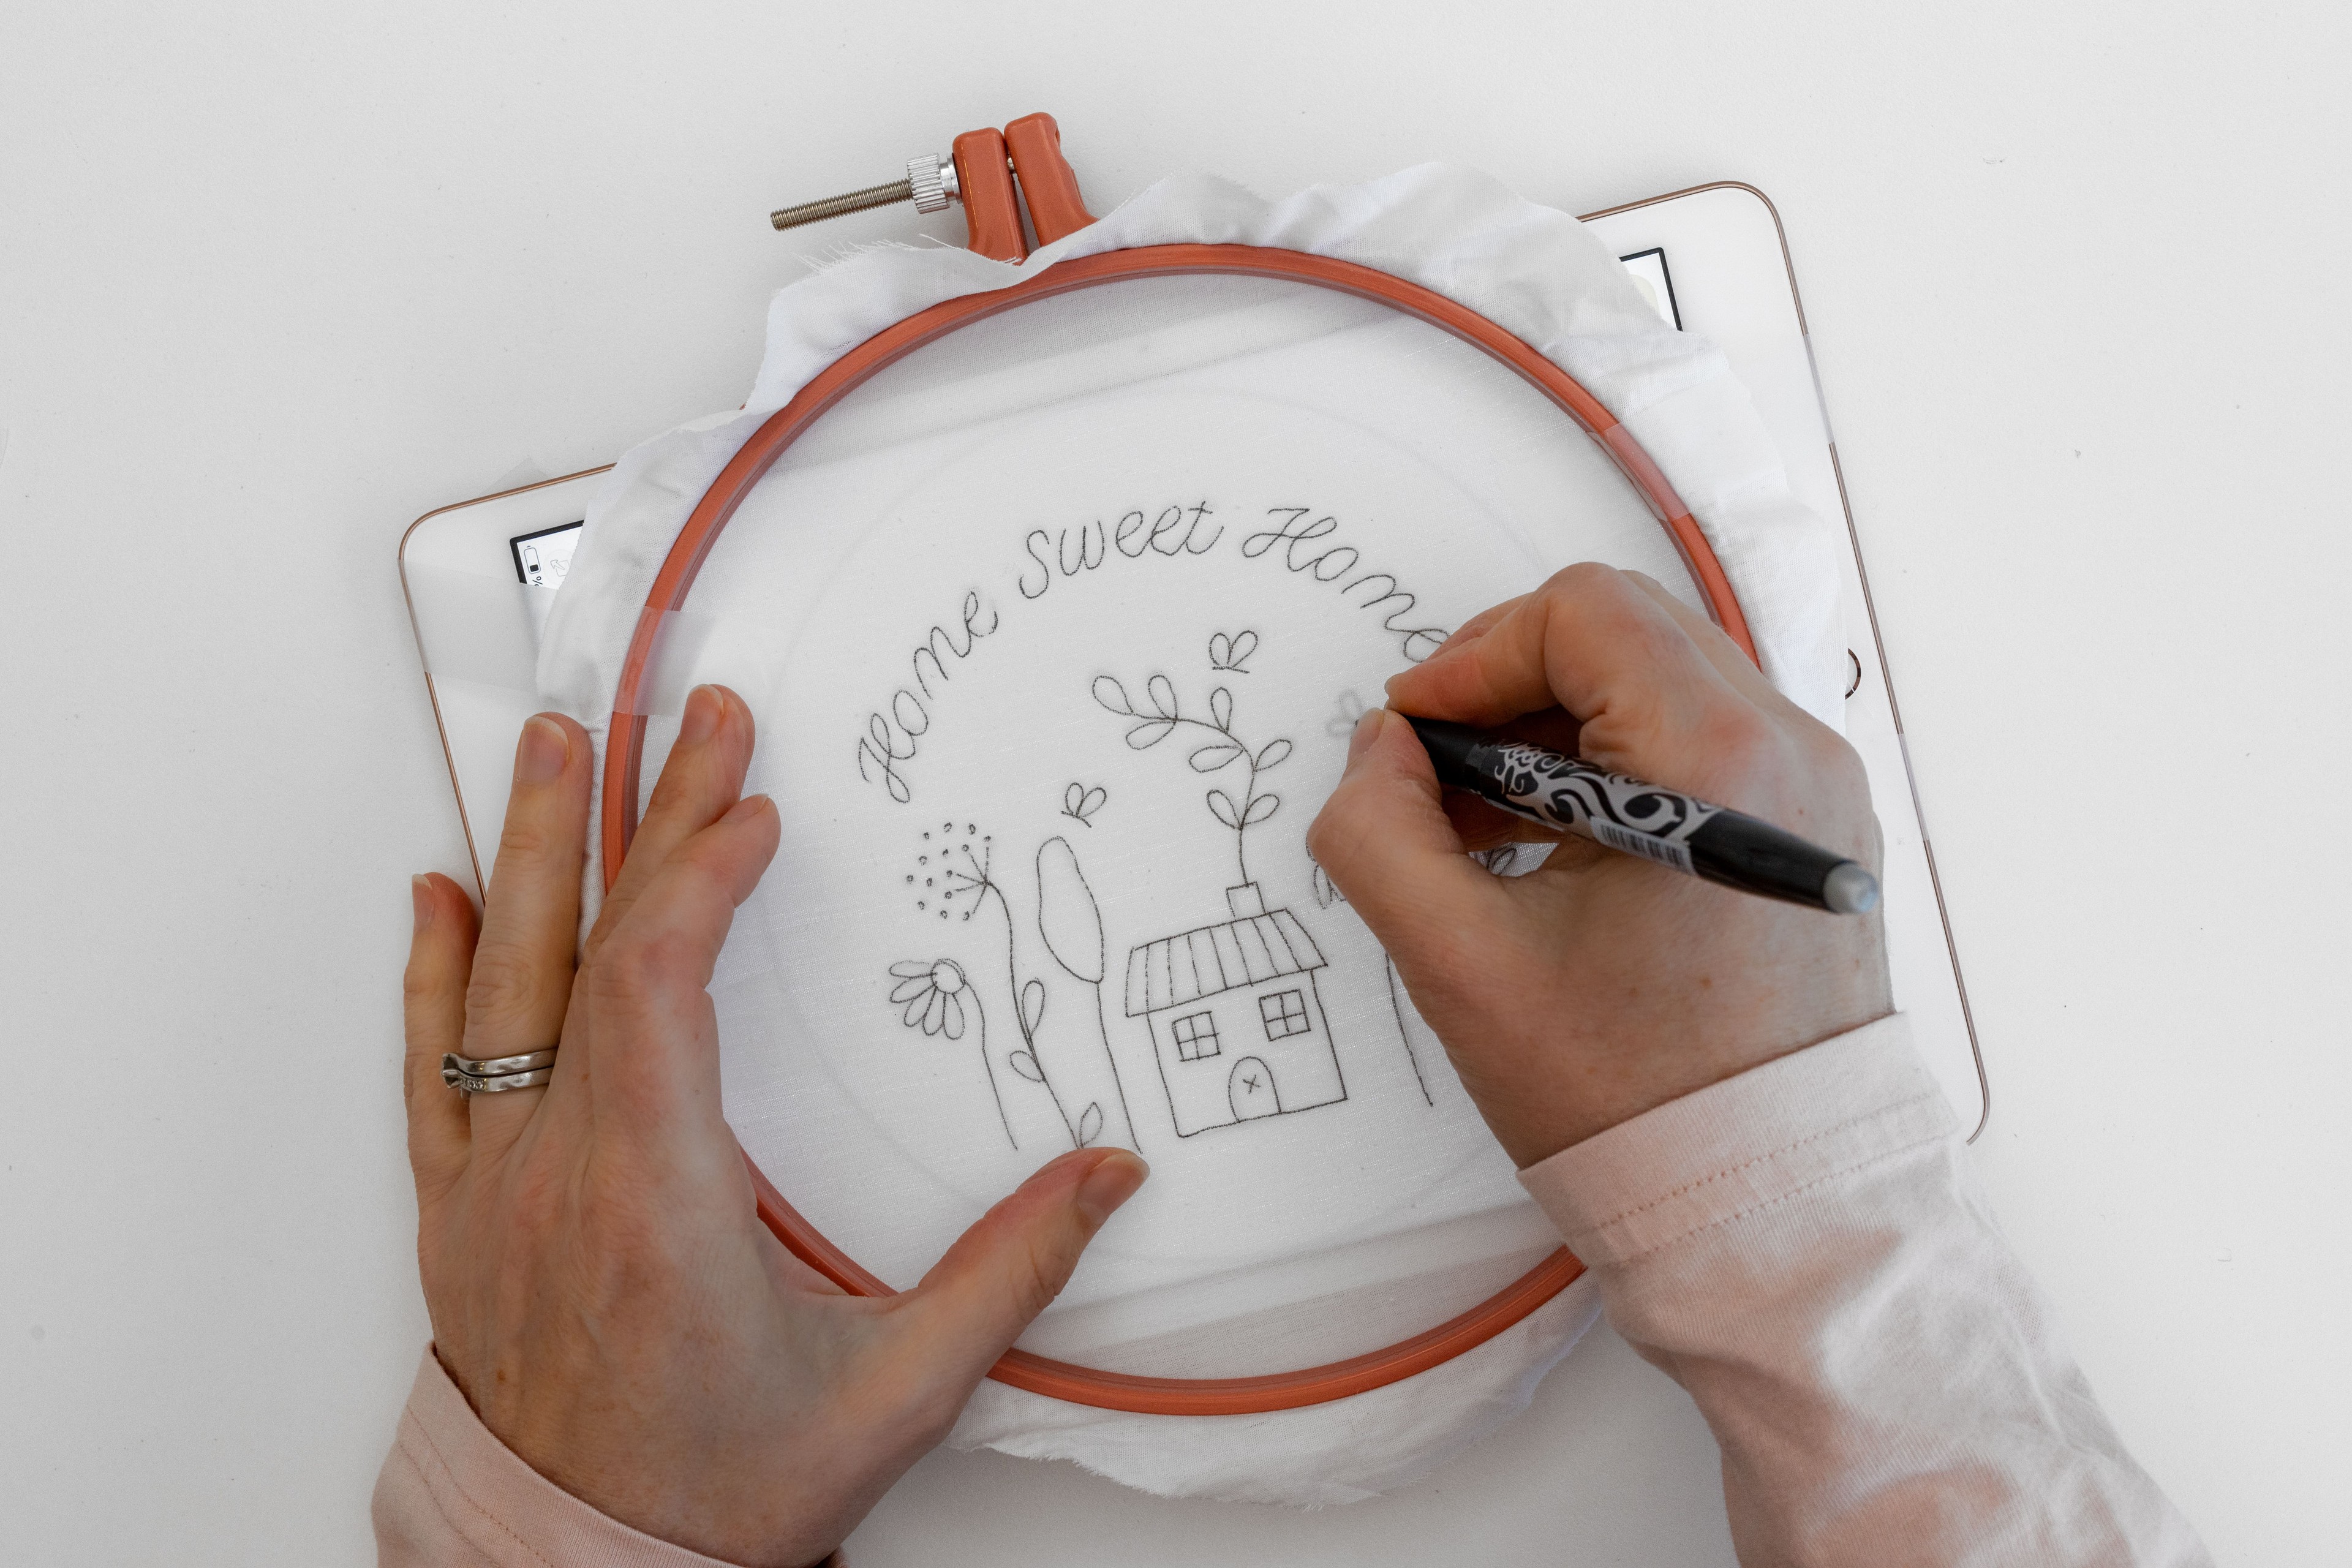 A hand draws a floral Home Sweet Home on the fabric with the Ipad behind it.